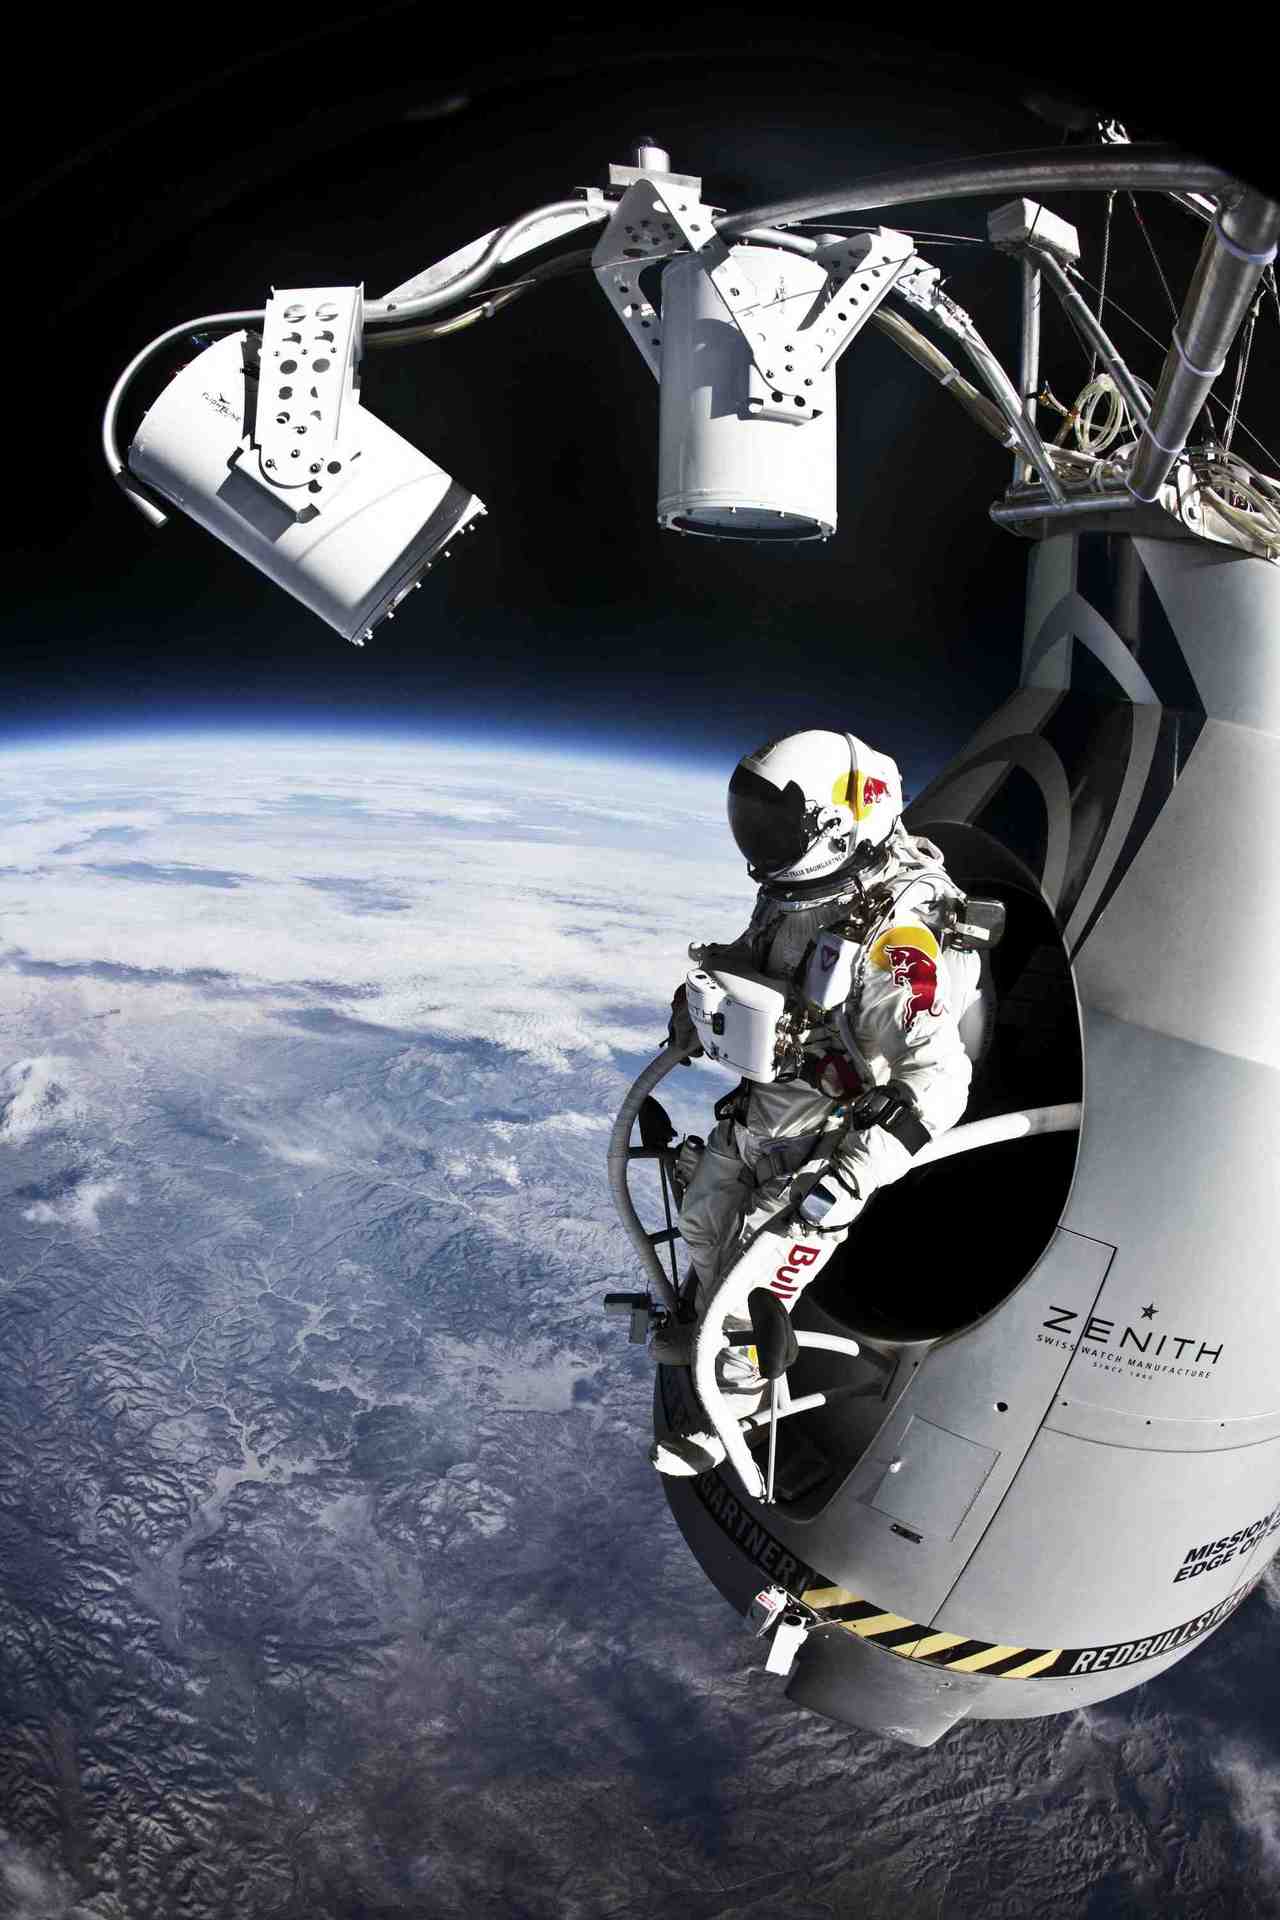 Felix Baumgartner jumping into space for Red Bull campaign